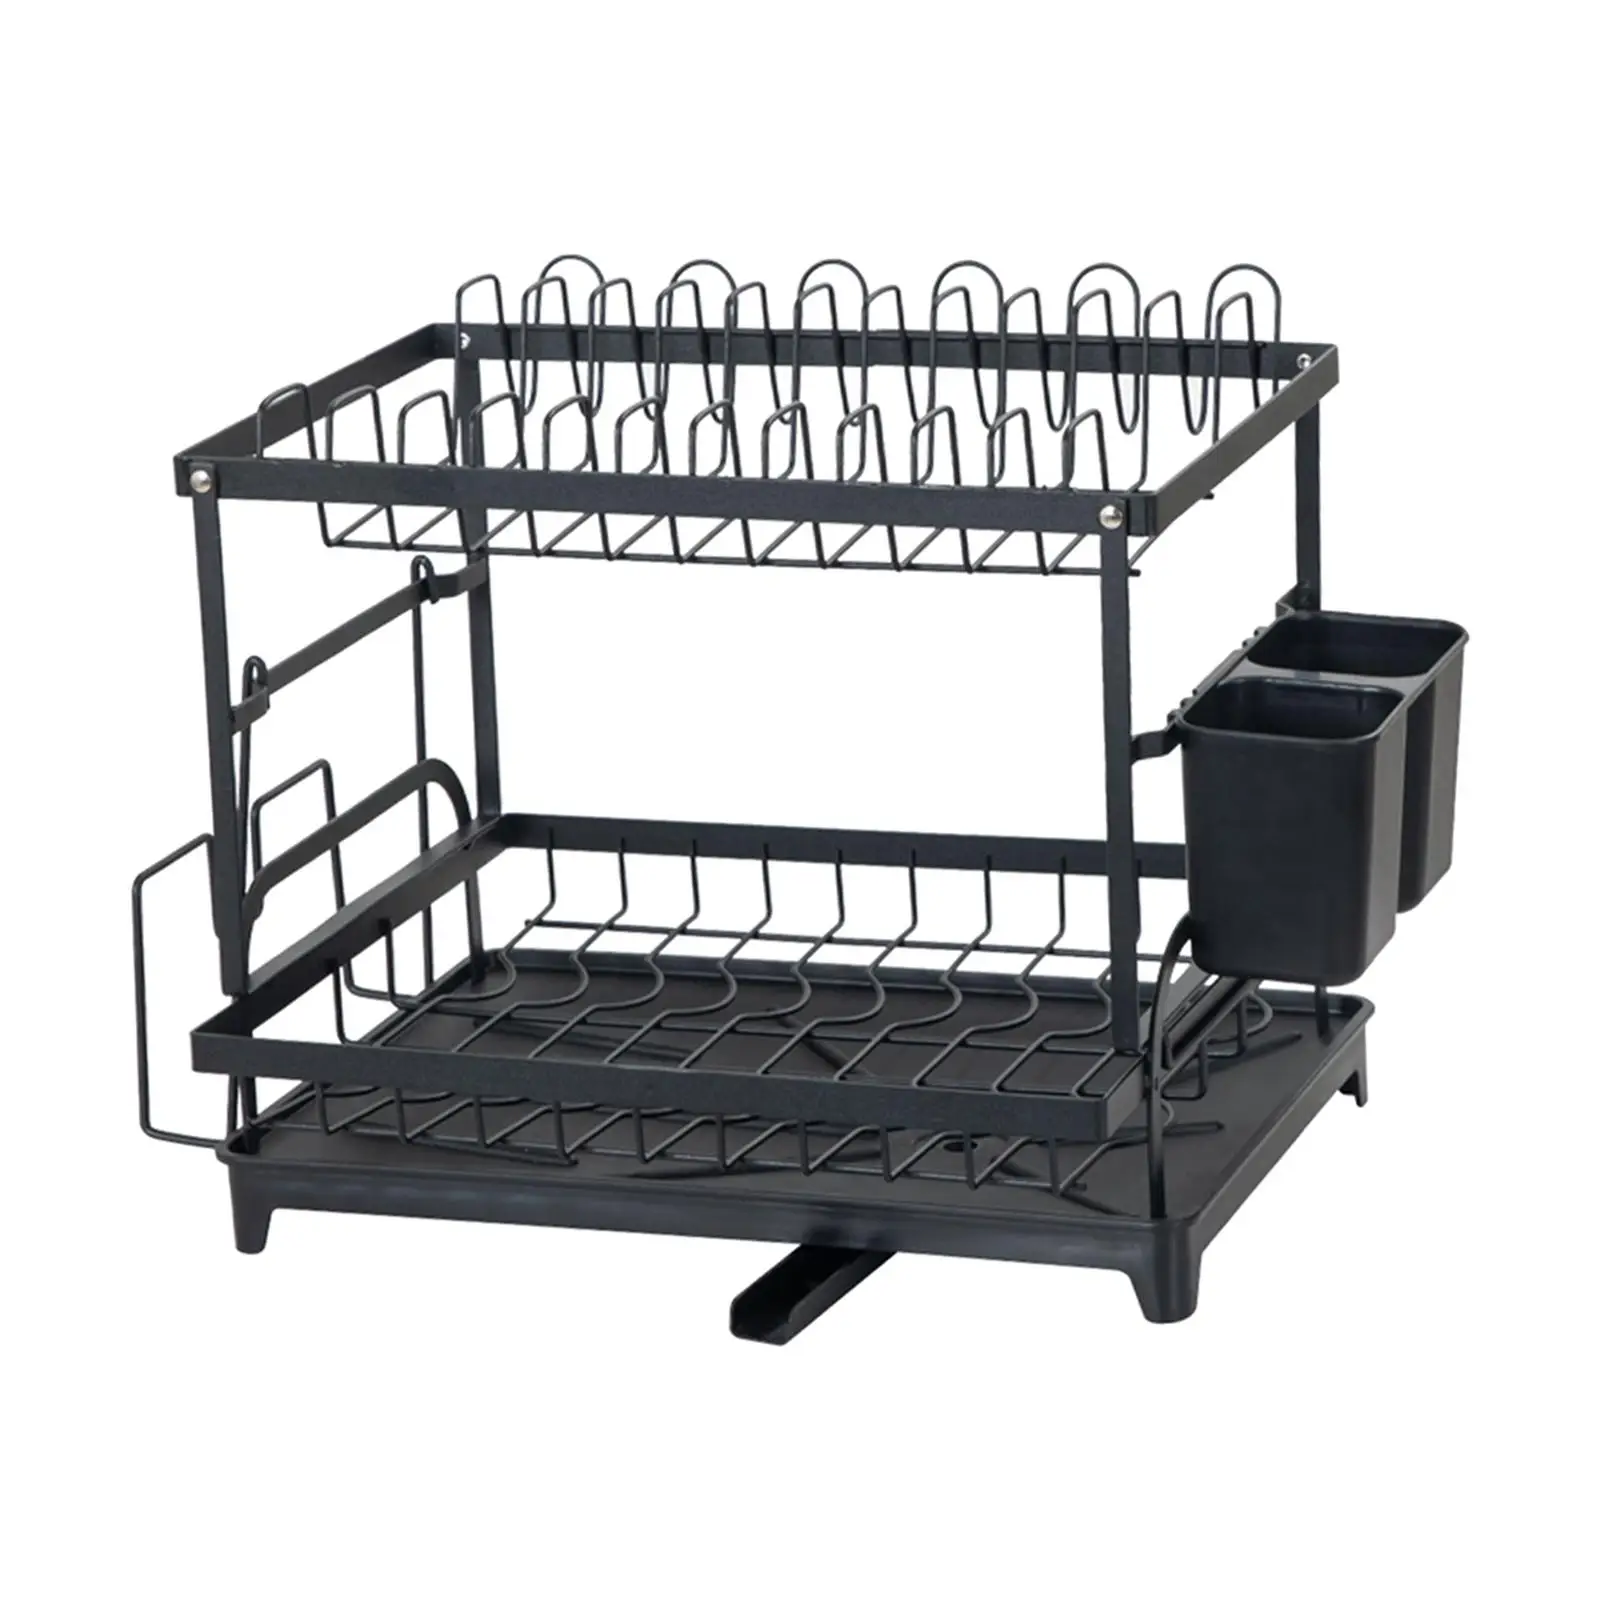 Plate Drainer Rack, Dish Drying Rack with Drainboard Organizer, Rust Resistant